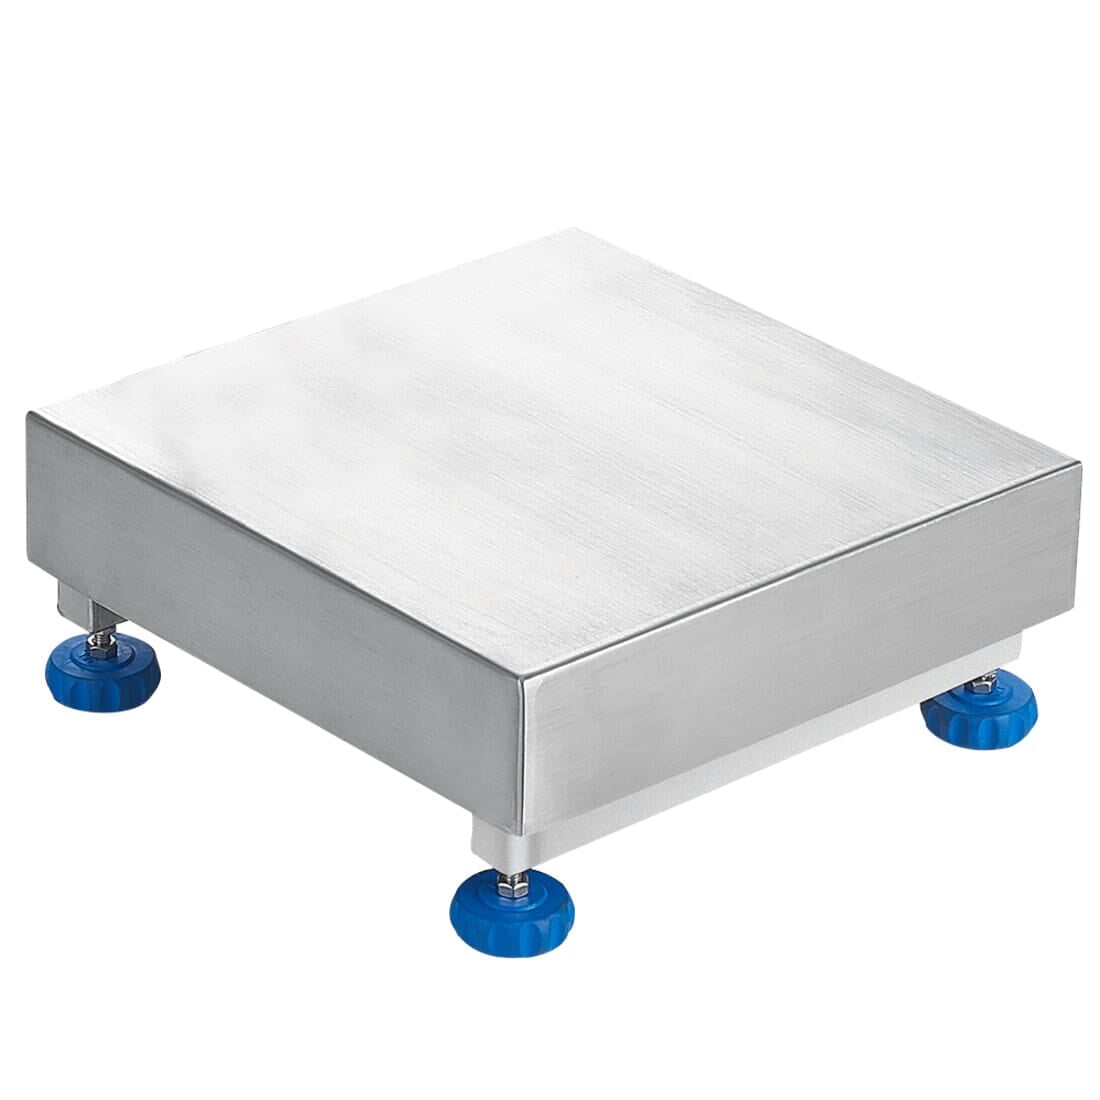 Adam Equipment WF 300AM W Series Approved Stainless Steel Platforms NTEP, 150000 g X 20 g